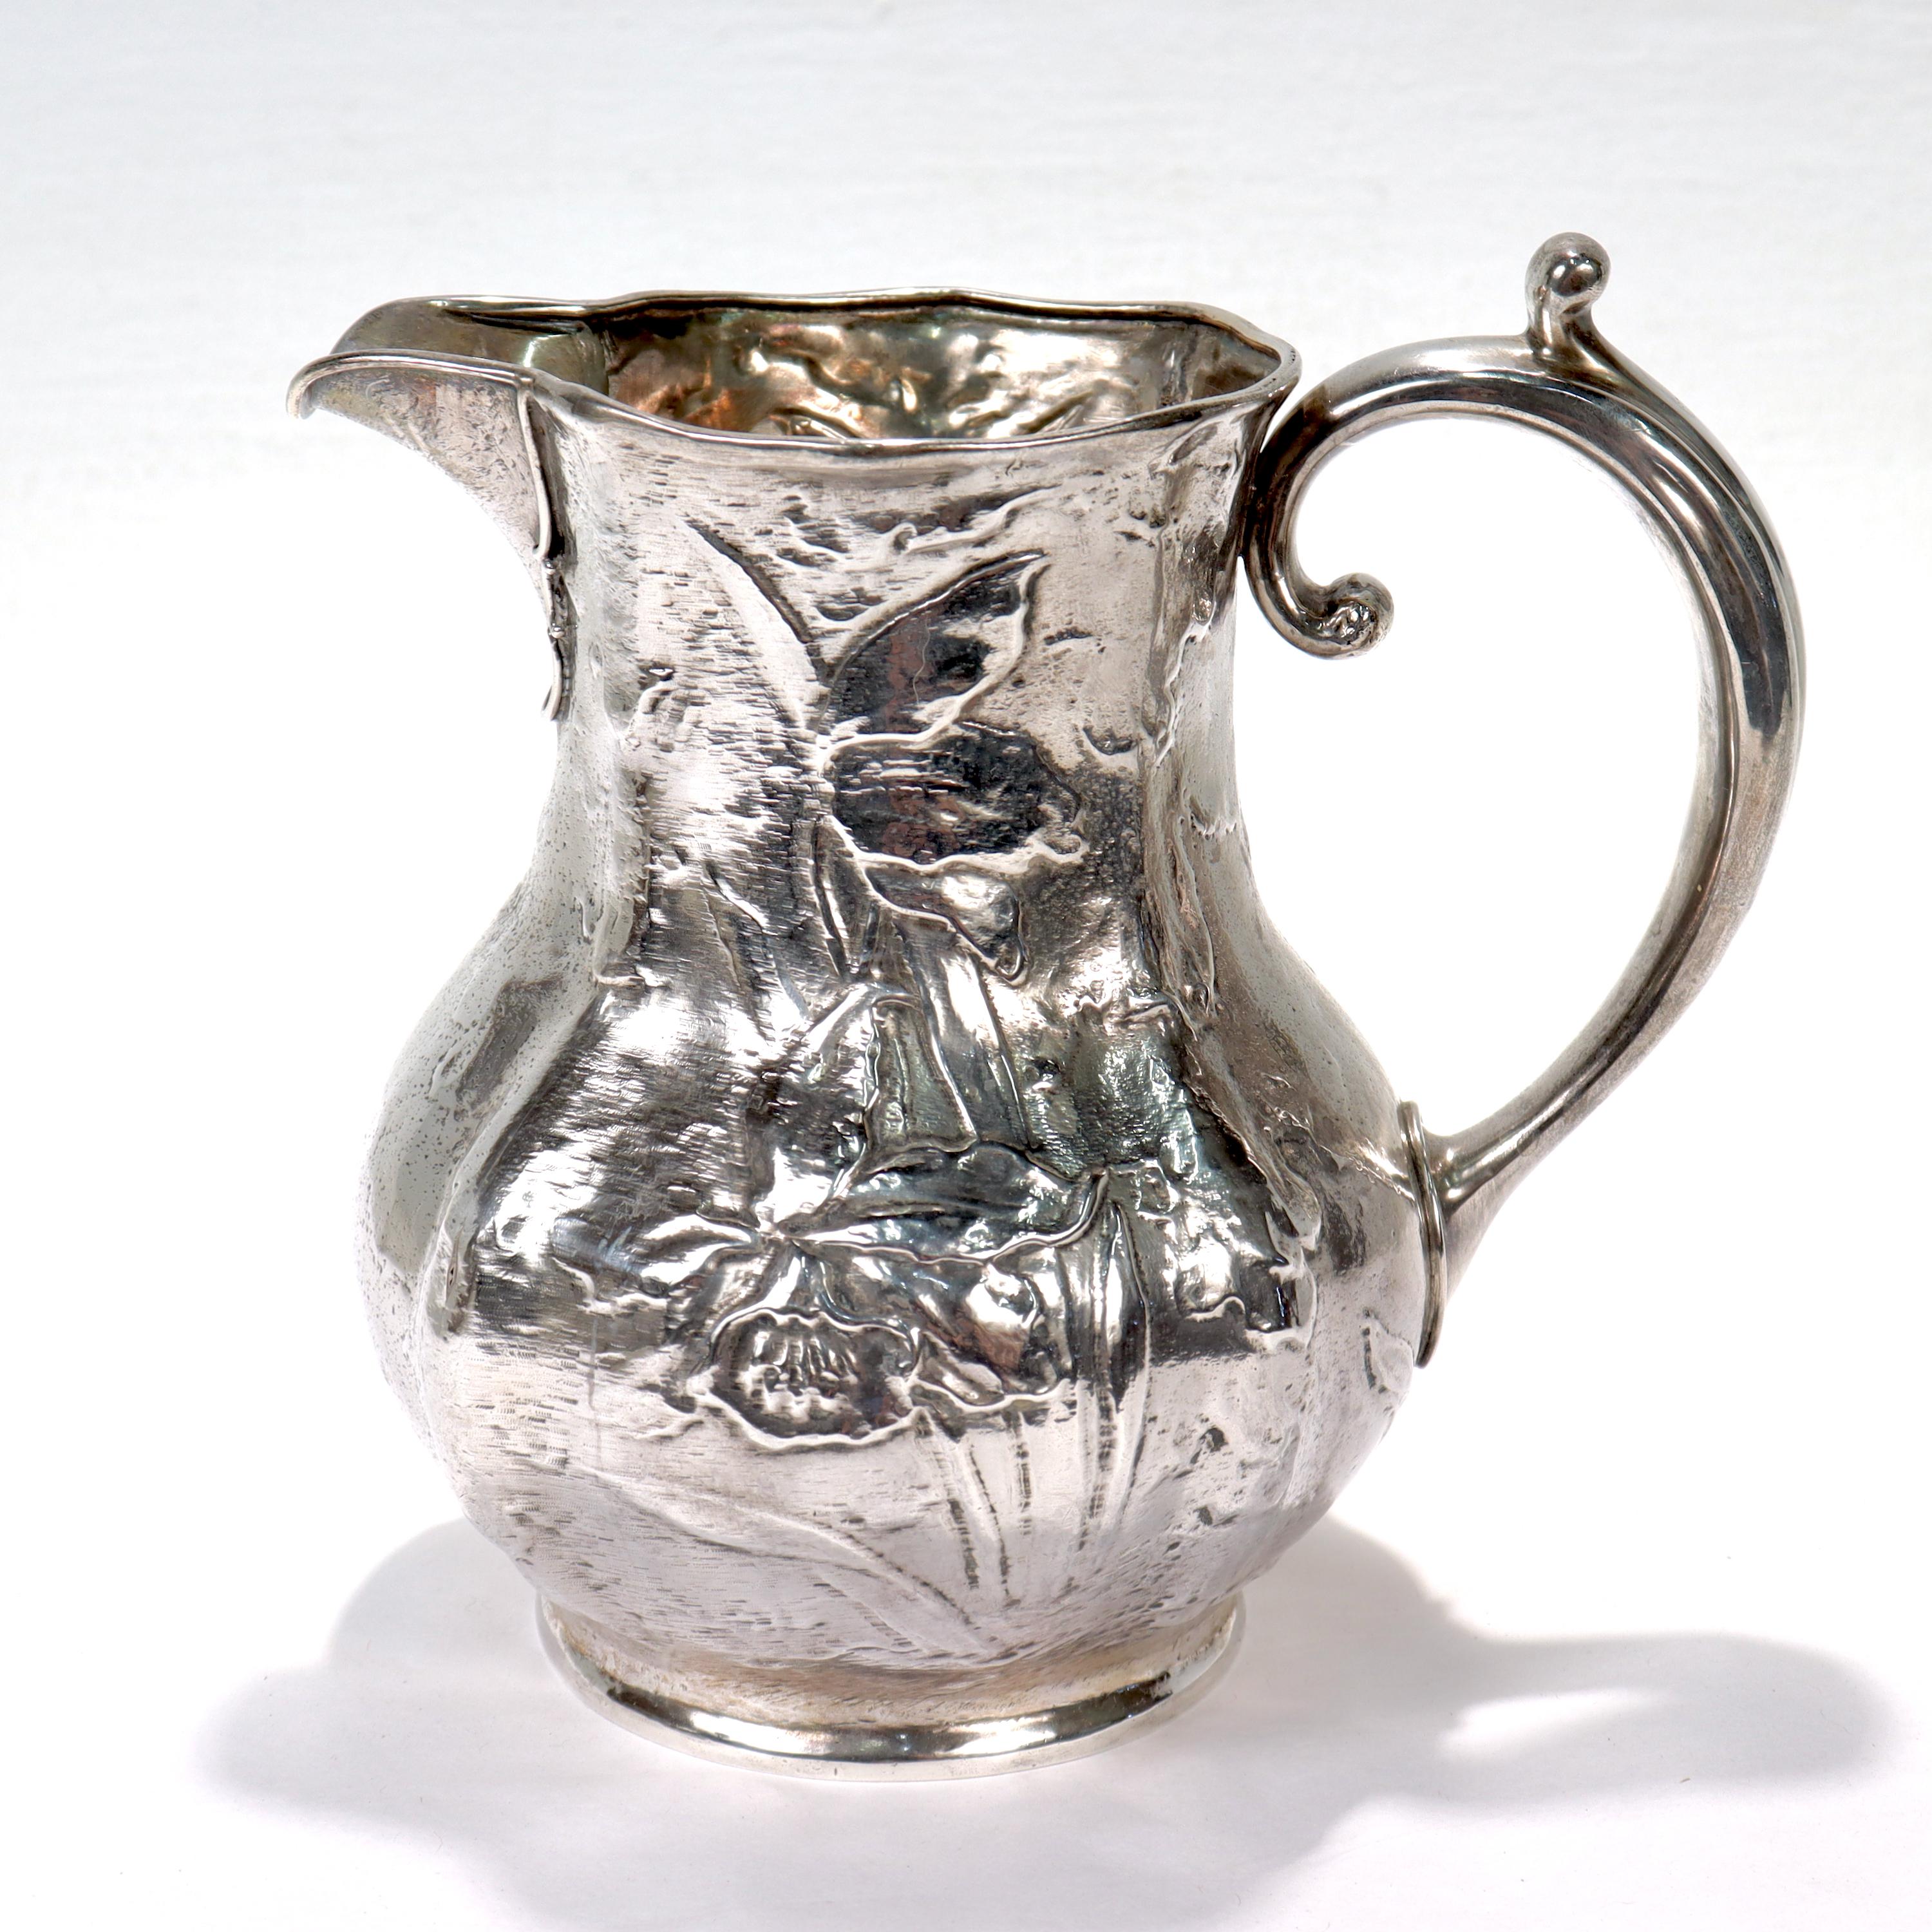 Antique Art Nouveau Gorham Sterling Silver Pitcher or Ewer with Enamel Flowers For Sale 3